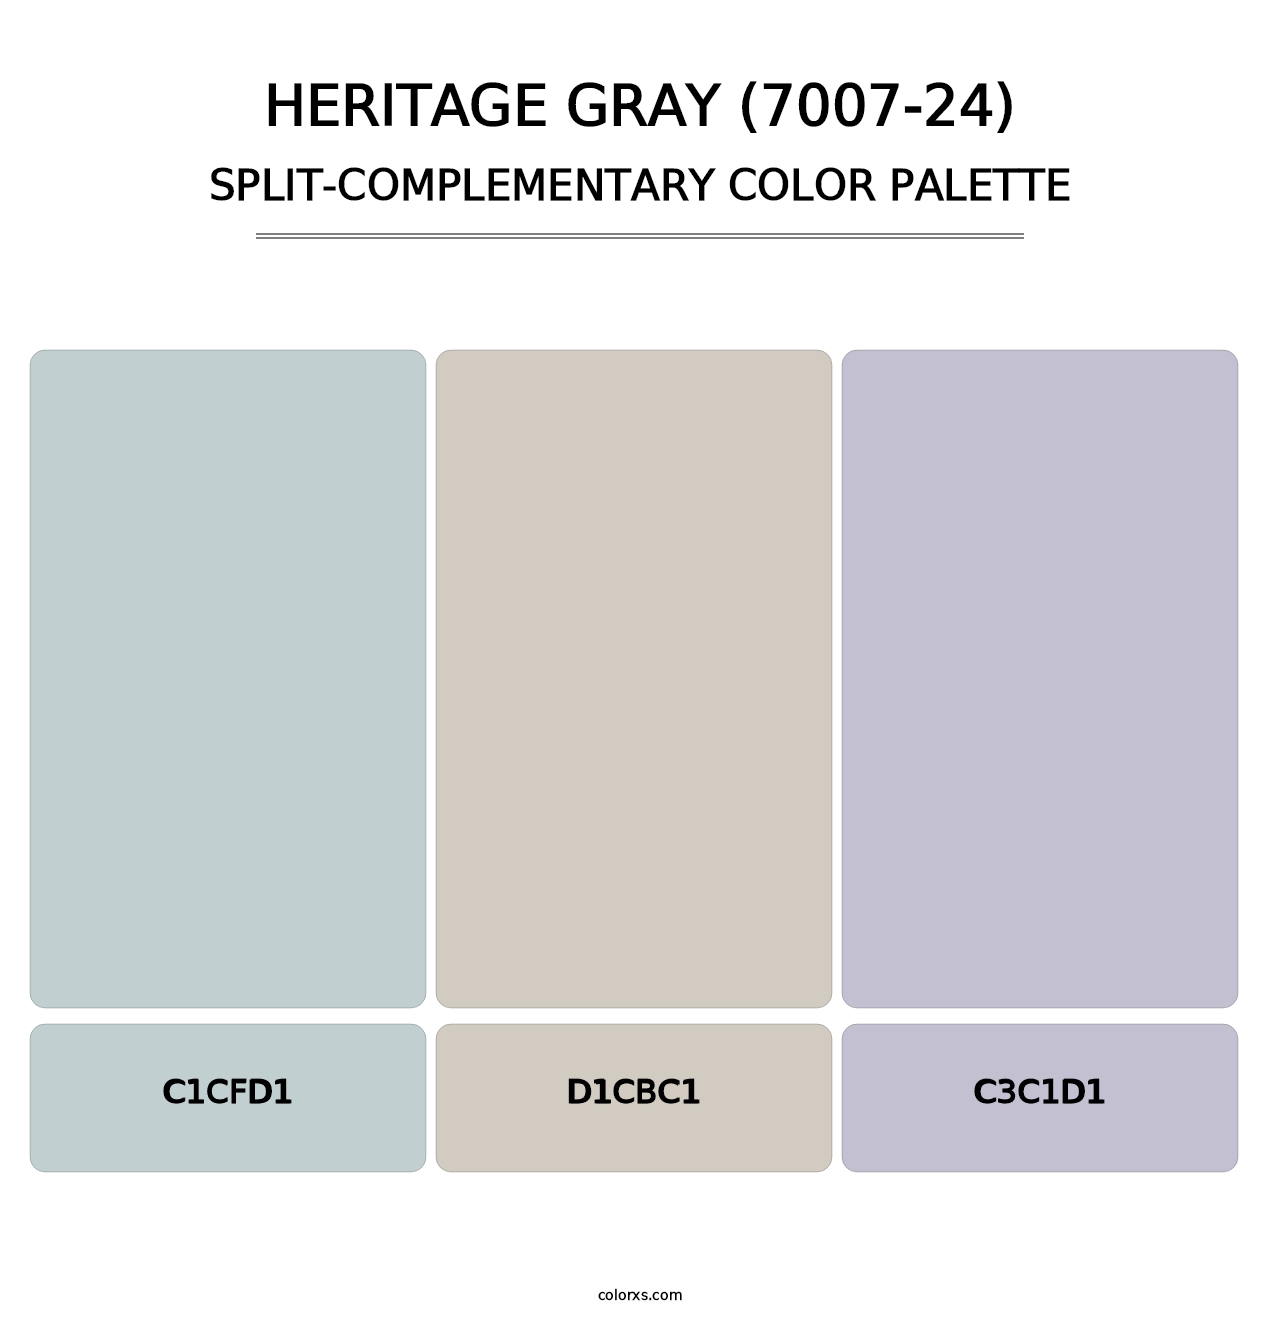 Heritage Gray (7007-24) - Split-Complementary Color Palette